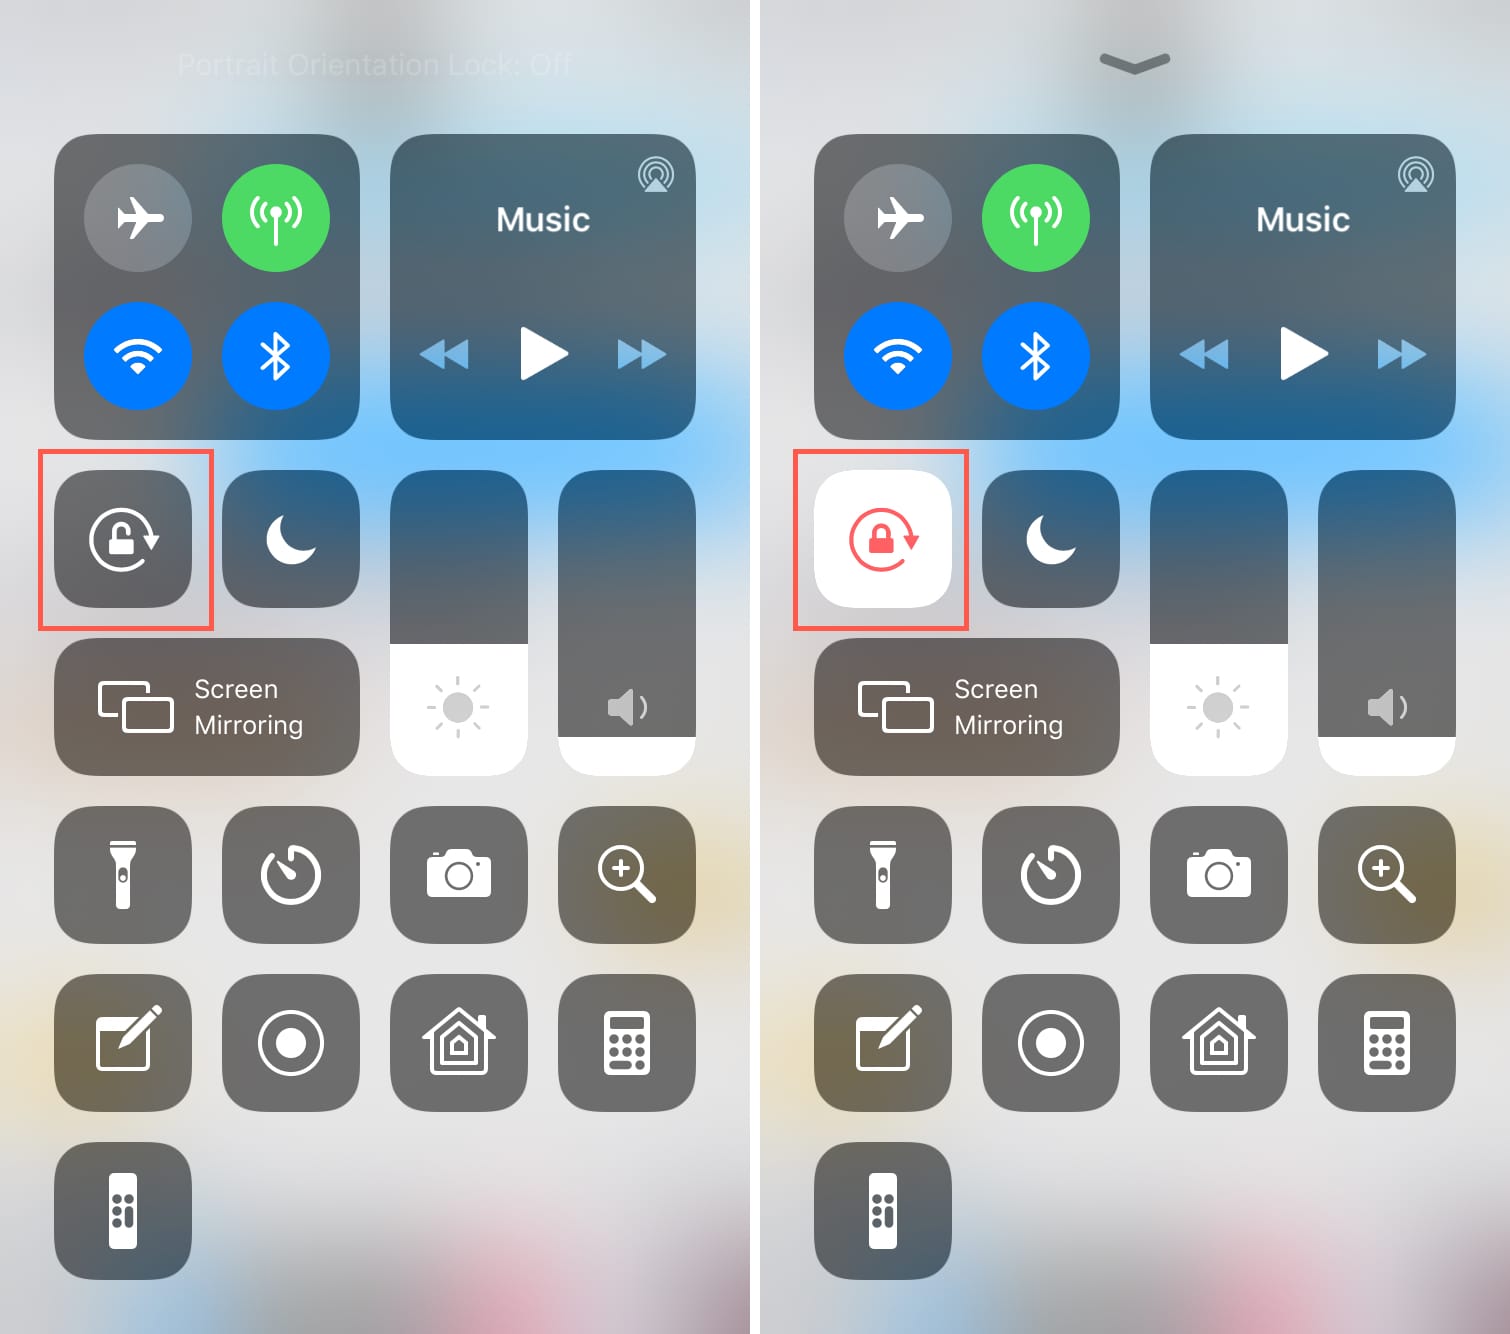 how to turn off rotating screen on iphone